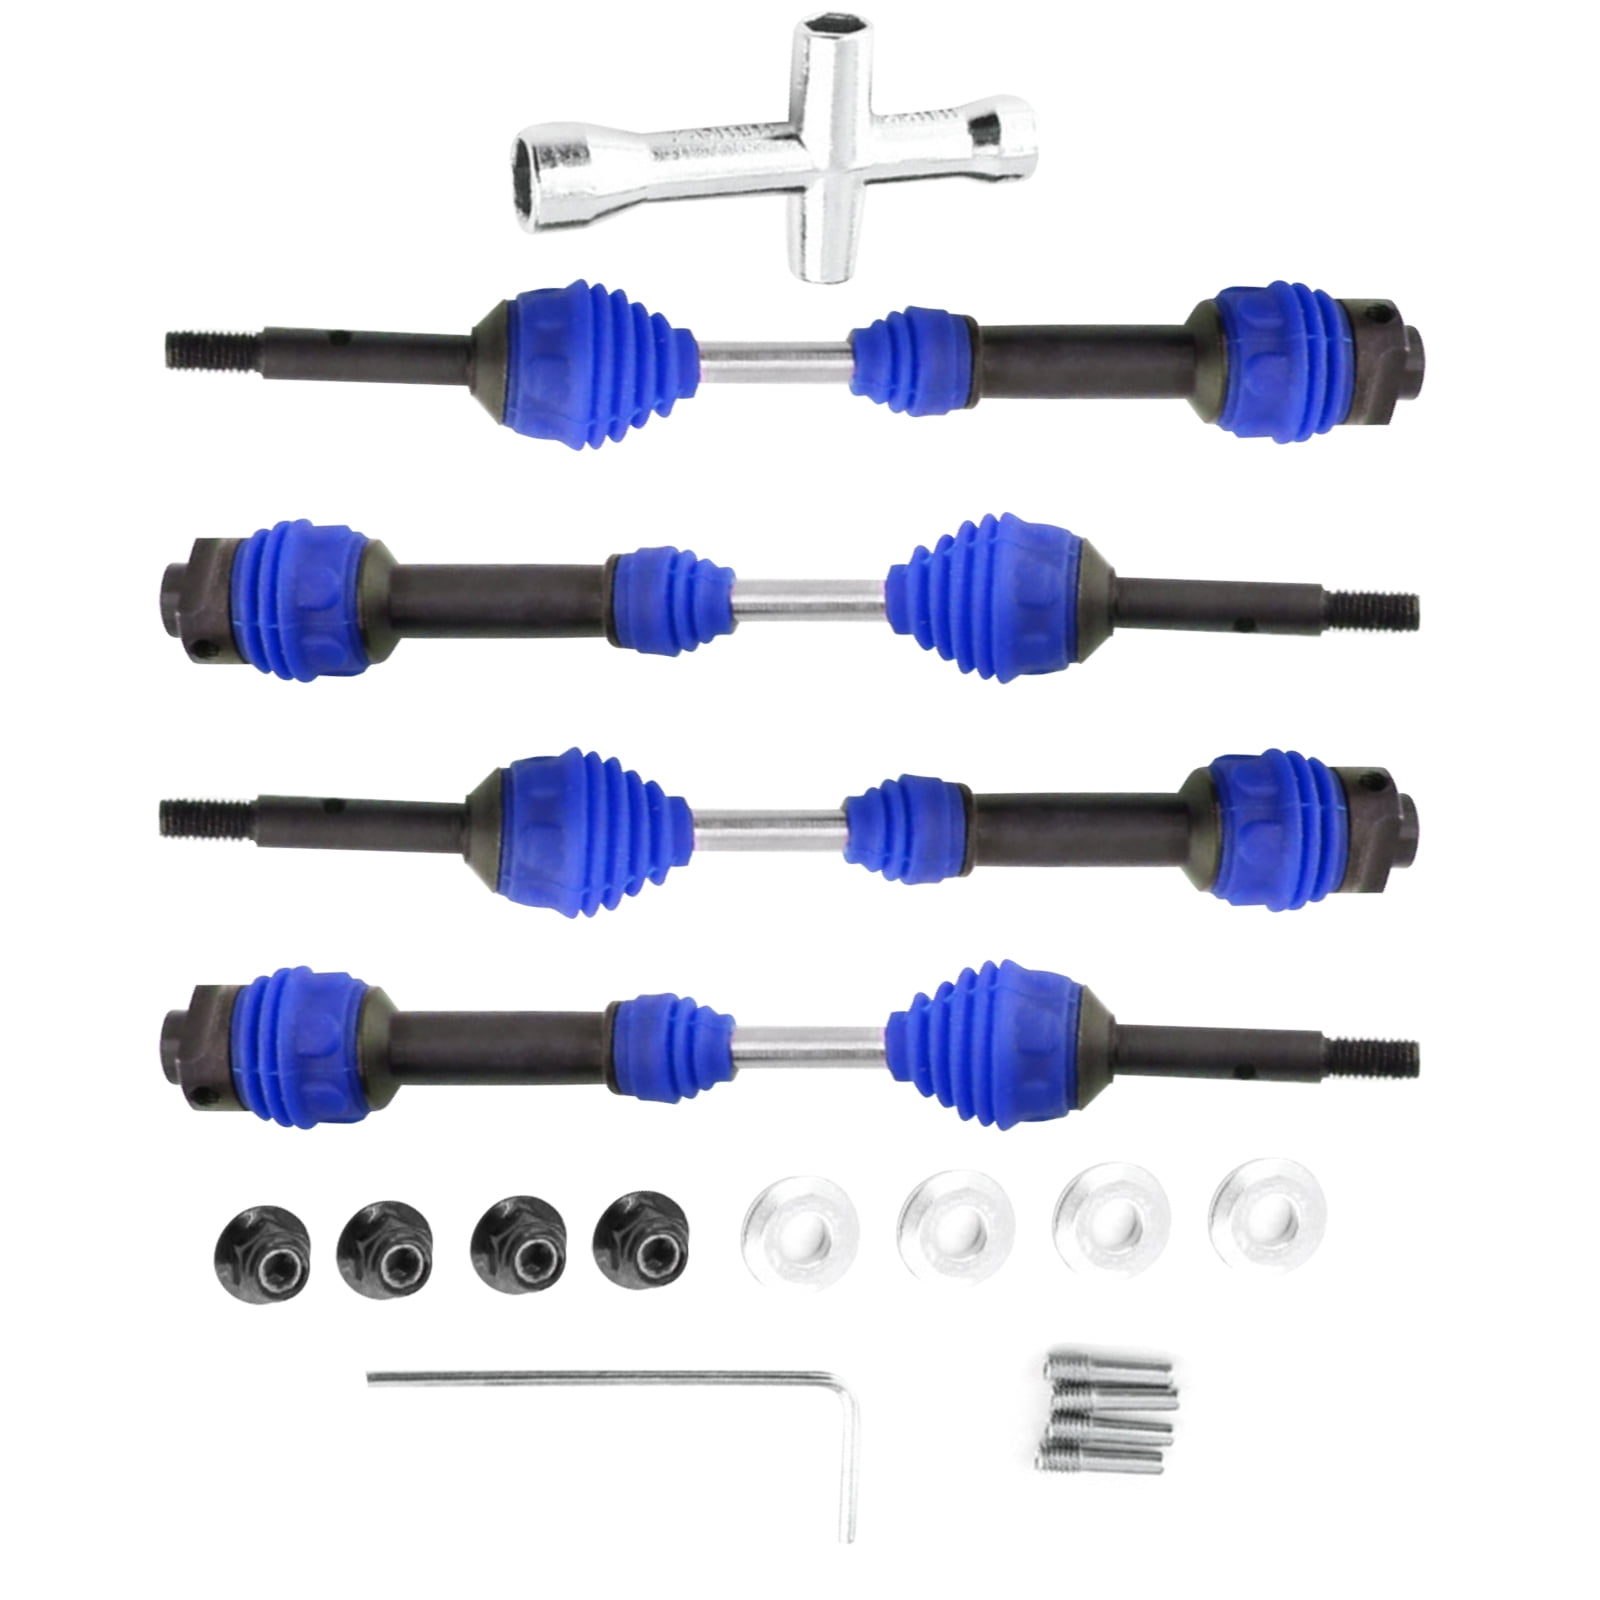 1/10 RC Car Front & Rear Drive Shafts Kits Upgrade Parts for